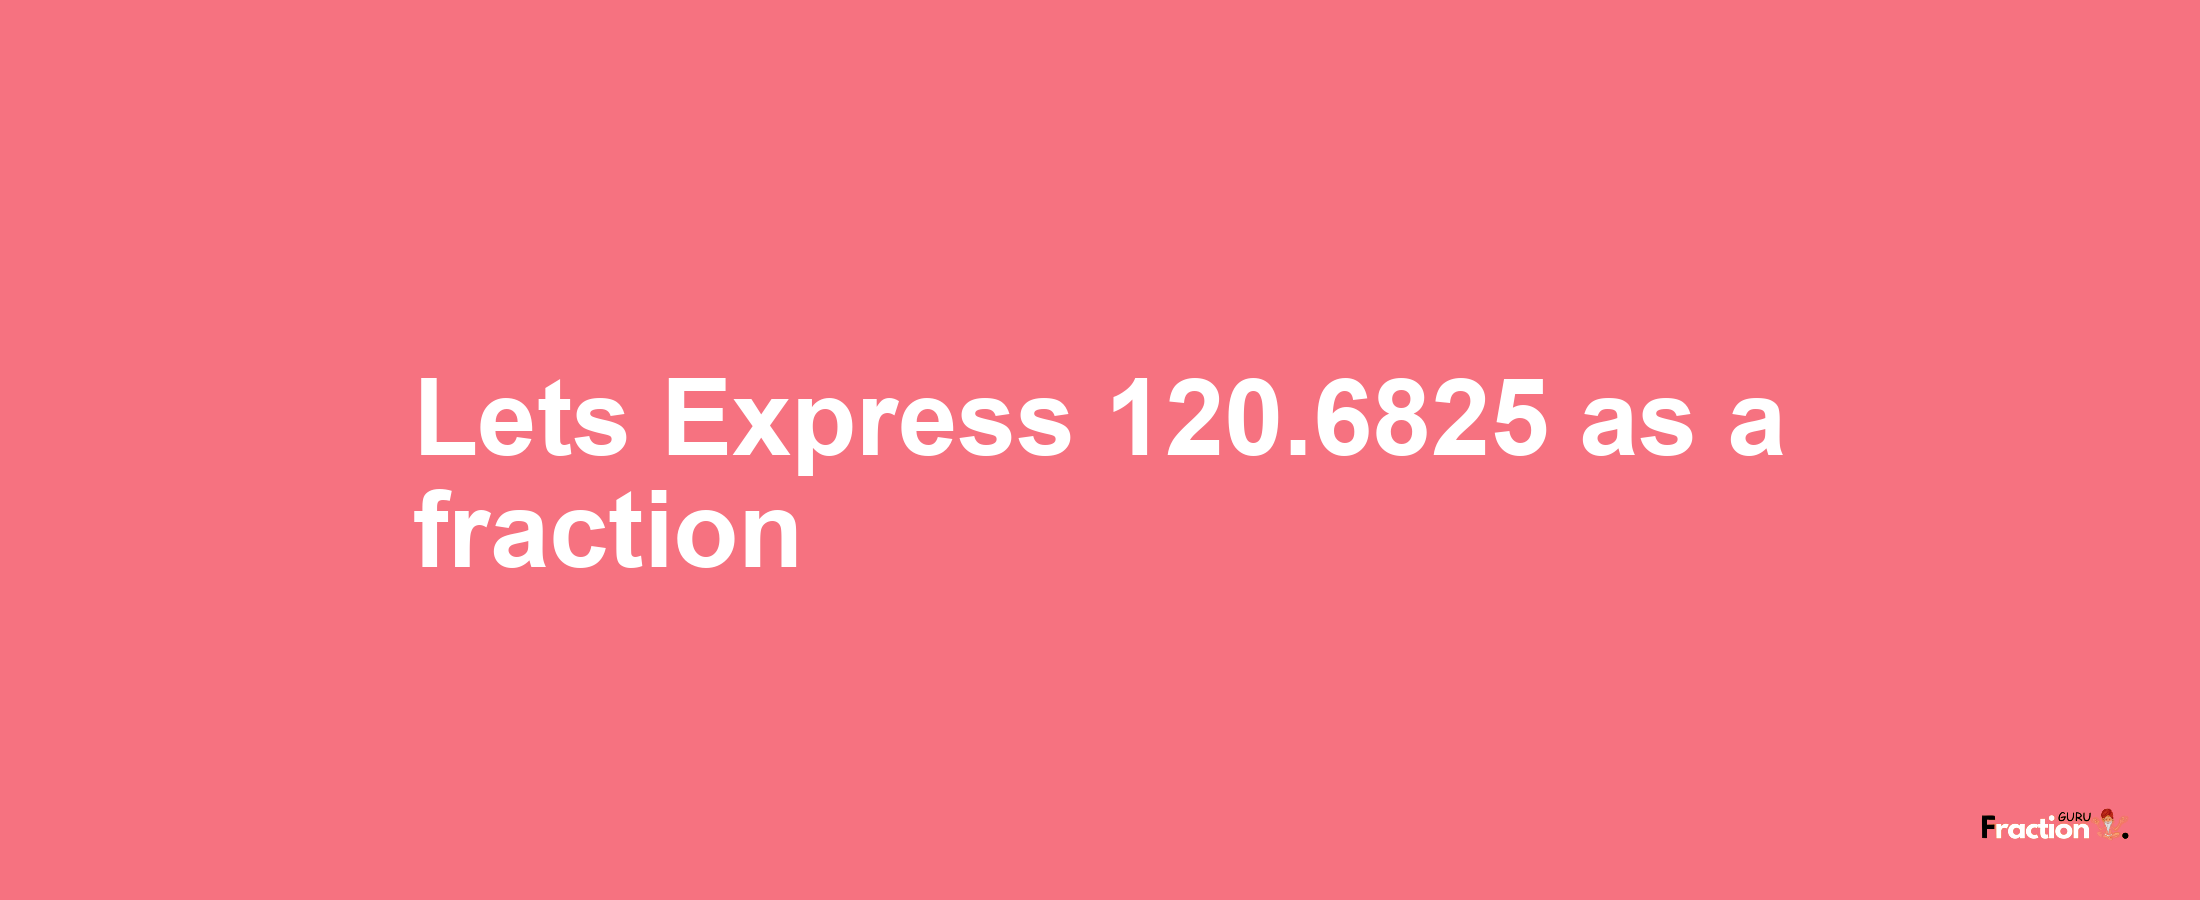 Lets Express 120.6825 as afraction